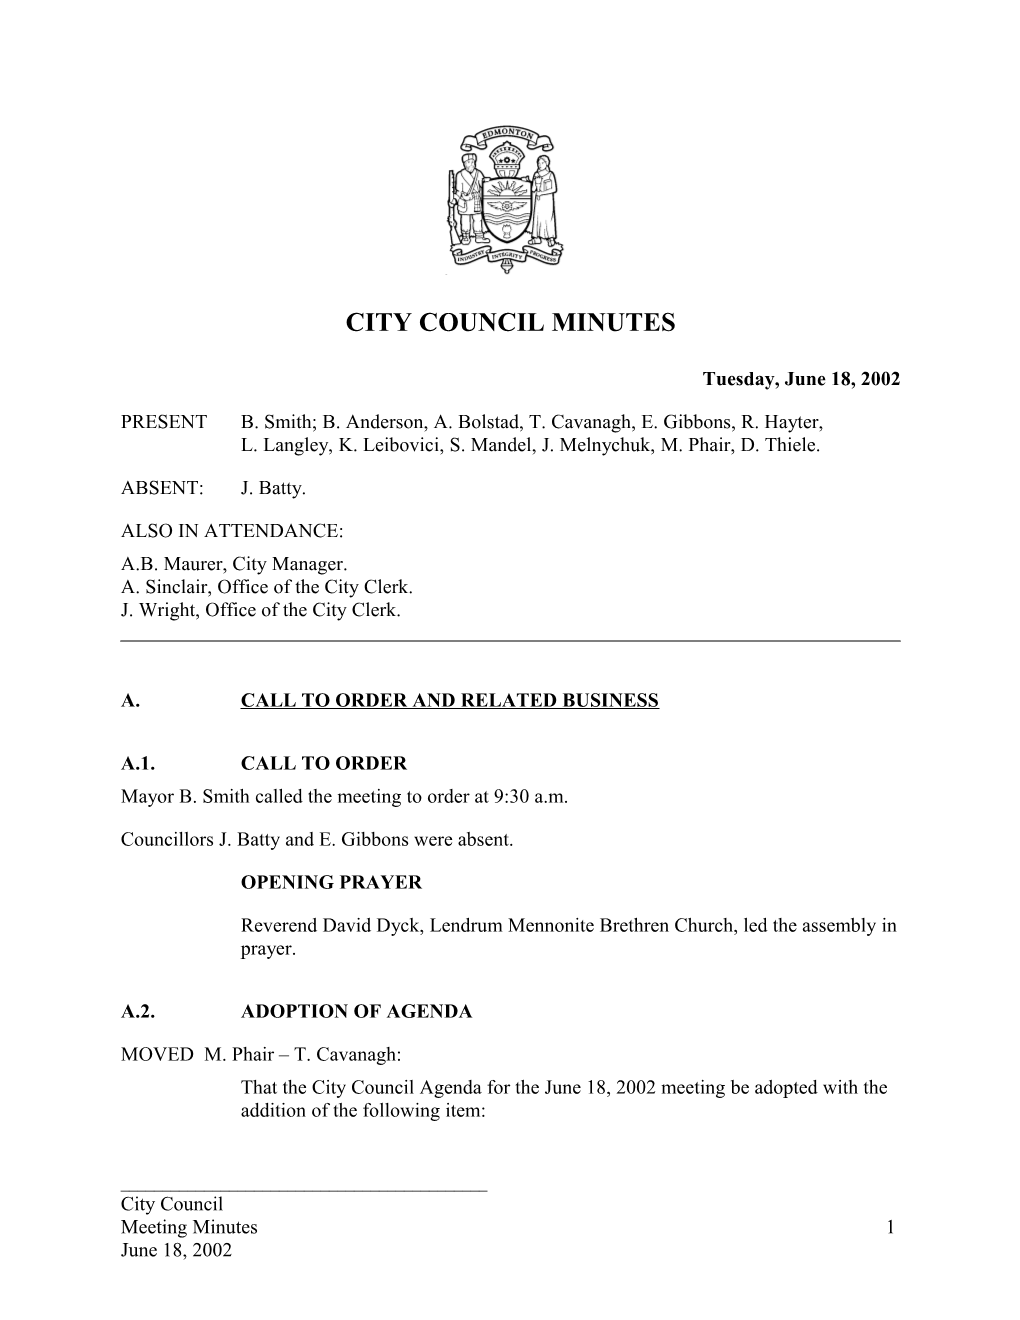 Minutes for City Council June 18, 2002 Meeting